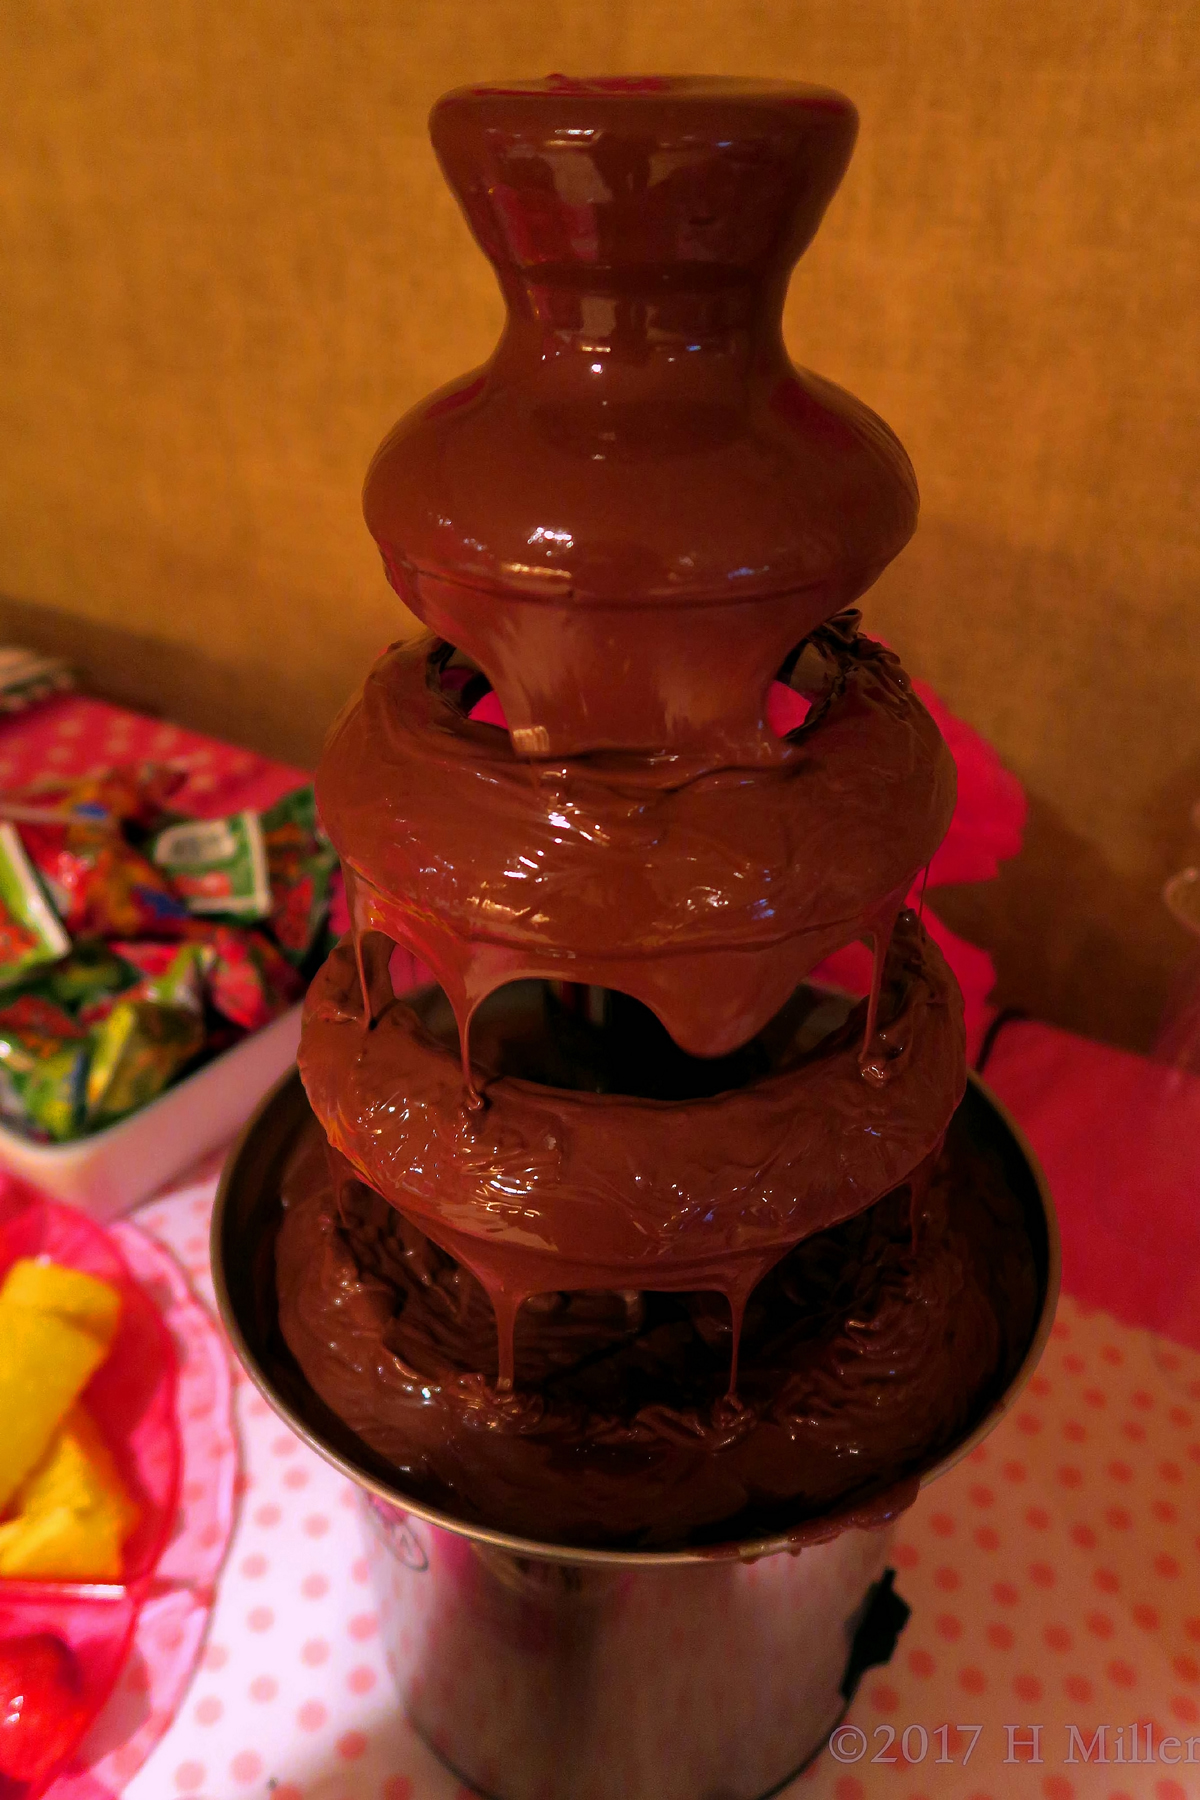 A Close Up Of The Chocolate Fountain. 